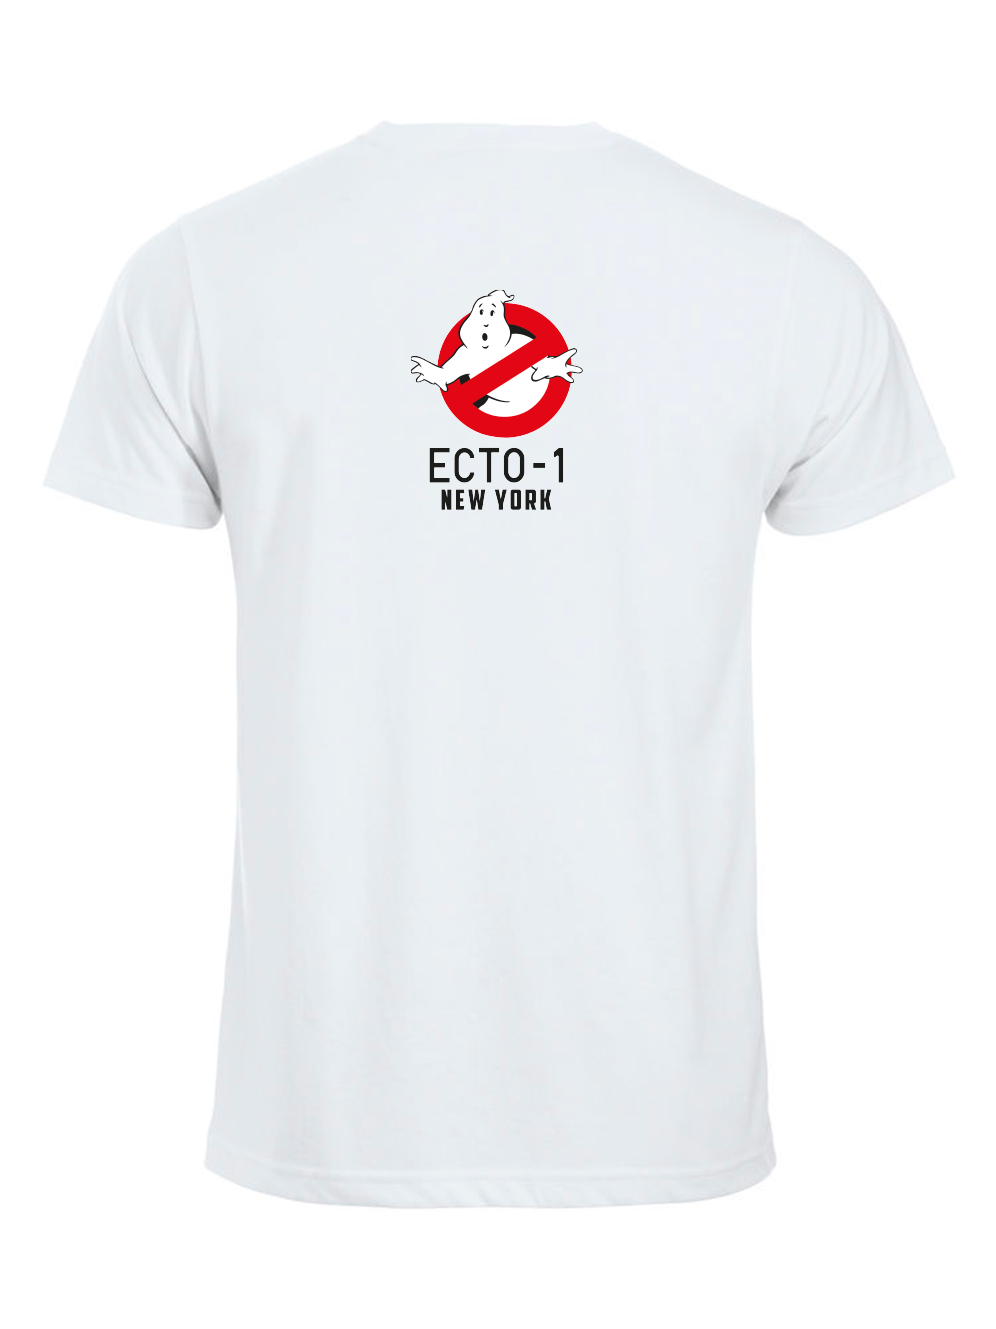 GHOSTBUSTERS T-SHIRT